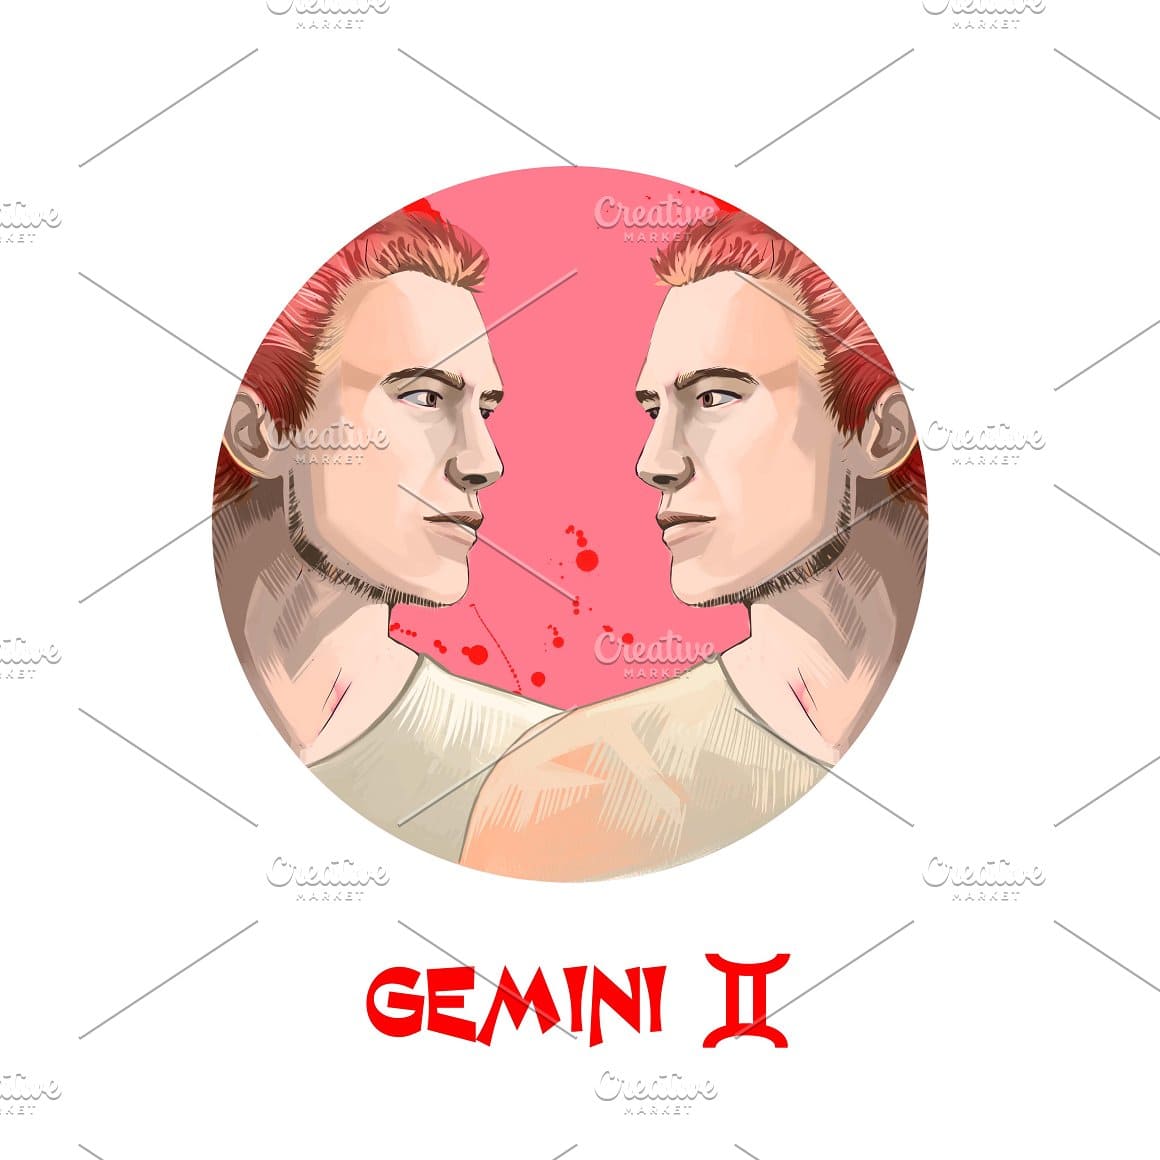 Two young men as the image of Gemini.